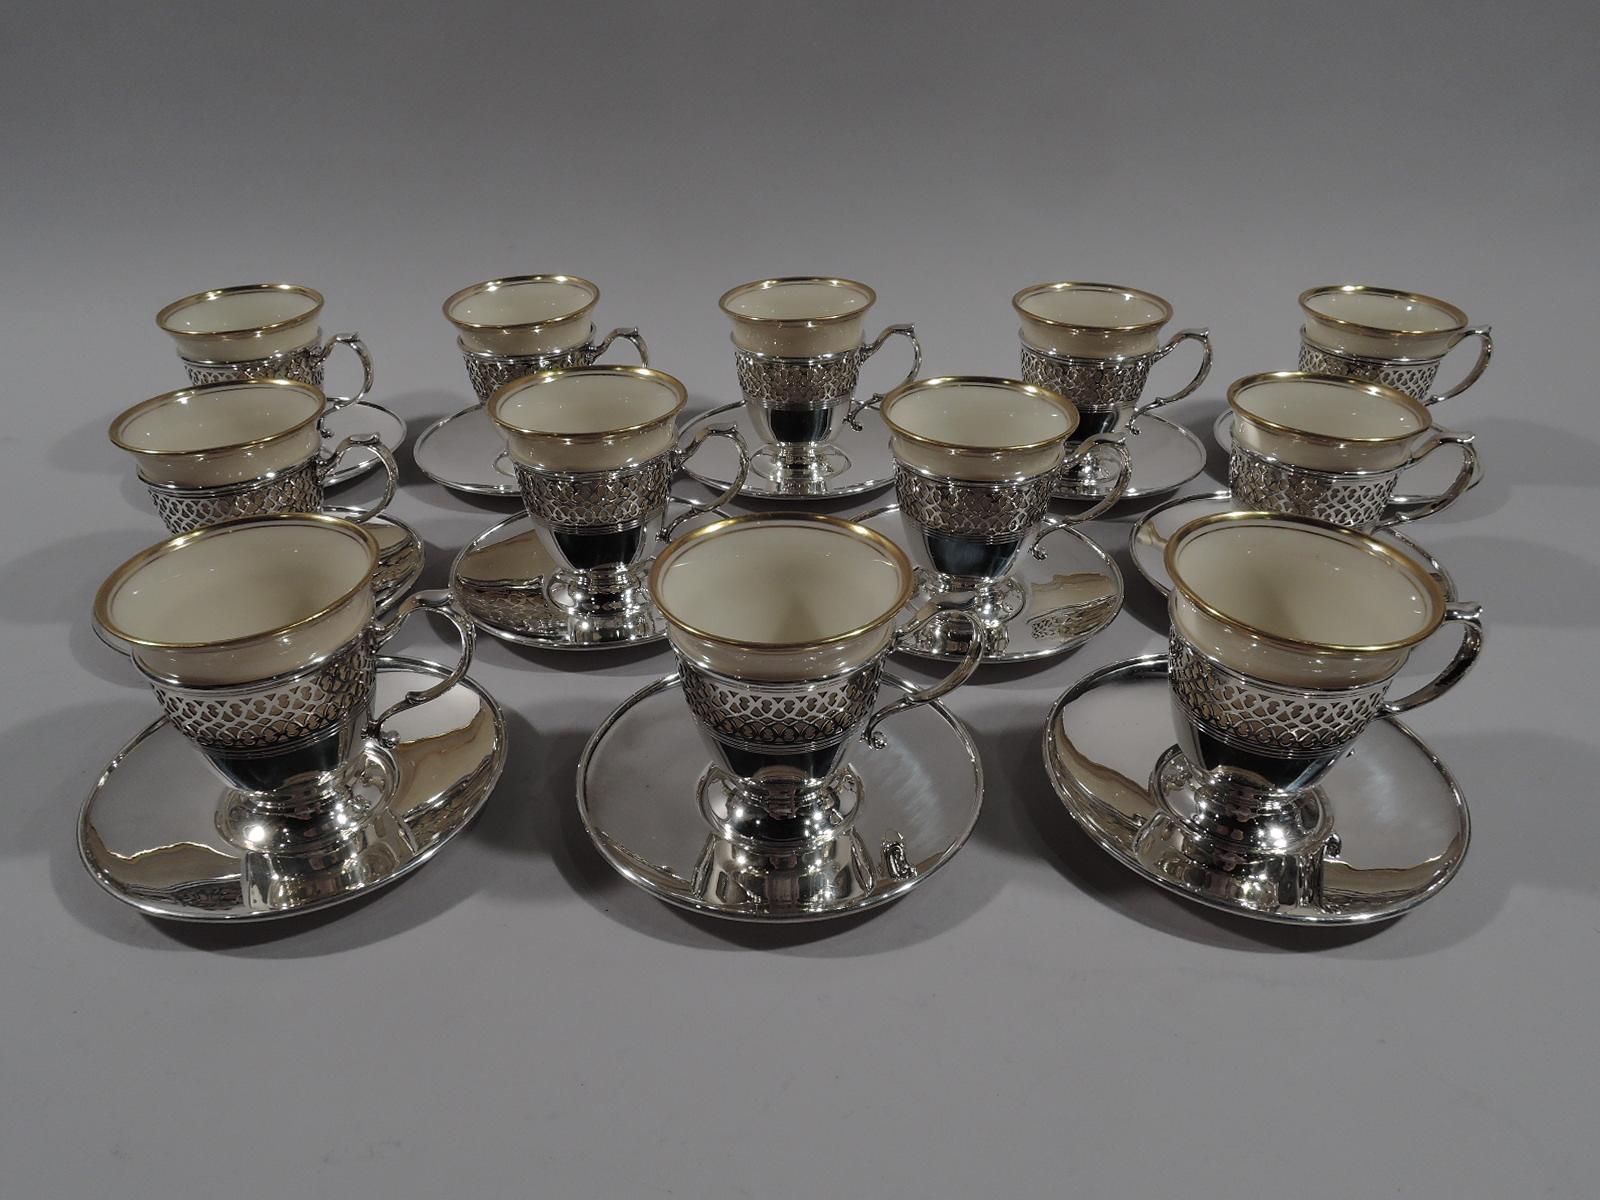 Set of 12 Edwardian sterling silver demi-tasse holders and saucers. Made by Tiffany & Co. in New York, circa 1914. This set comprises 12 holders and 12 saucers. Each holder: Conical with spread foot and capped s-scroll handle. Scrolling pierced band